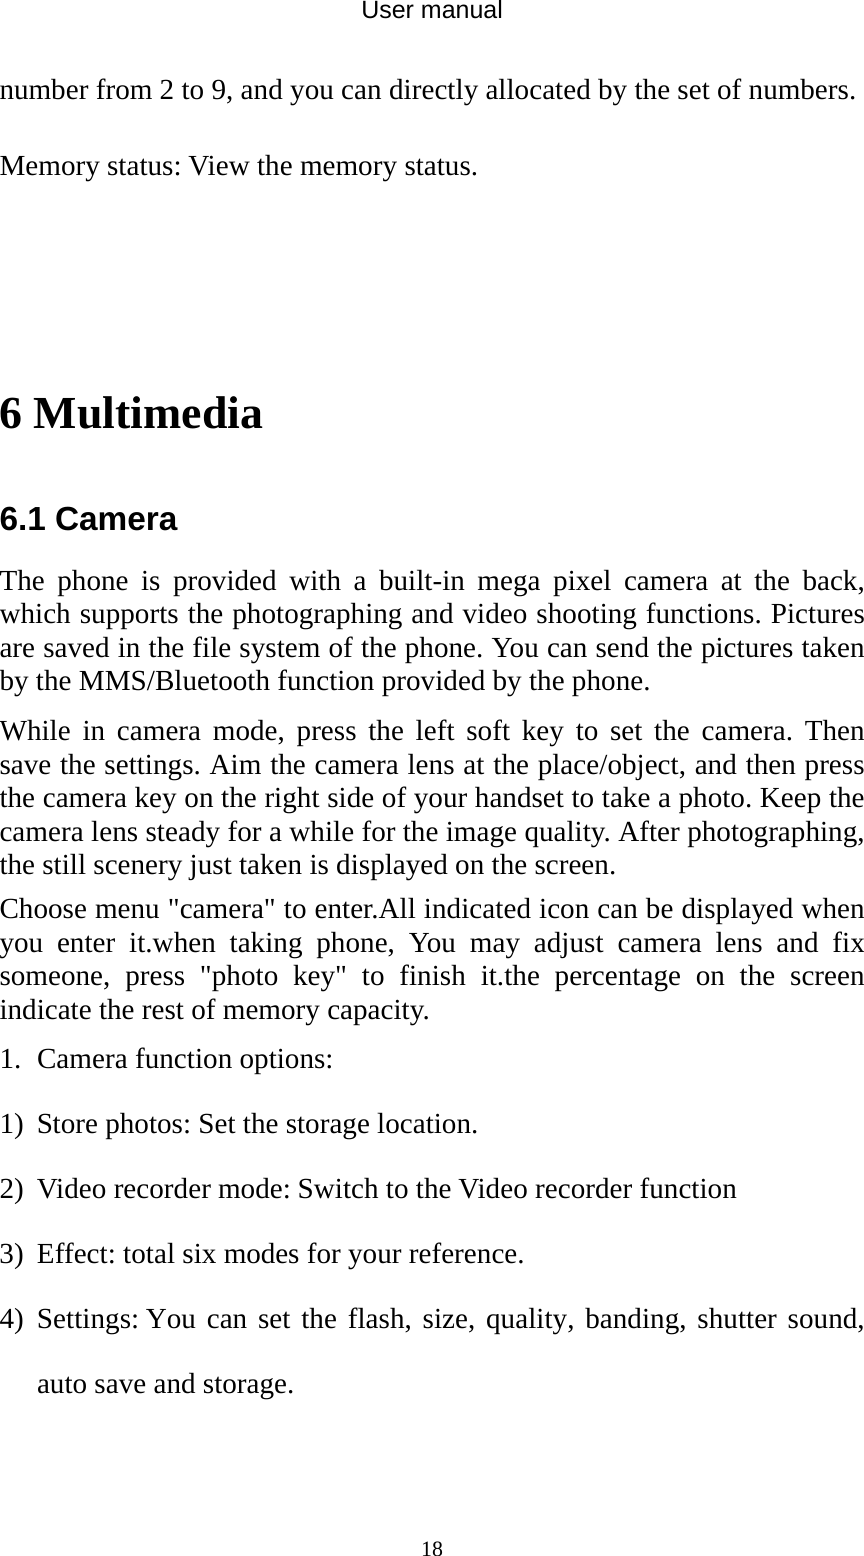 User manual  18number from 2 to 9, and you can directly allocated by the set of numbers. Memory status: View the memory status.   6 Multimedia 6.1 Camera The phone is provided with a built-in mega pixel camera at the back, which supports the photographing and video shooting functions. Pictures are saved in the file system of the phone. You can send the pictures taken by the MMS/Bluetooth function provided by the phone. While in camera mode, press the left soft key to set the camera. Then save the settings. Aim the camera lens at the place/object, and then press the camera key on the right side of your handset to take a photo. Keep the camera lens steady for a while for the image quality. After photographing, the still scenery just taken is displayed on the screen. Choose menu &quot;camera&quot; to enter.All indicated icon can be displayed when you enter it.when taking phone, You may adjust camera lens and fix someone, press &quot;photo key&quot; to finish it.the percentage on the screen indicate the rest of memory capacity. 1. Camera function options: 1) Store photos: Set the storage location. 2) Video recorder mode: Switch to the Video recorder function 3) Effect: total six modes for your reference. 4) Settings: You can set the flash, size, quality, banding, shutter sound, auto save and storage. 